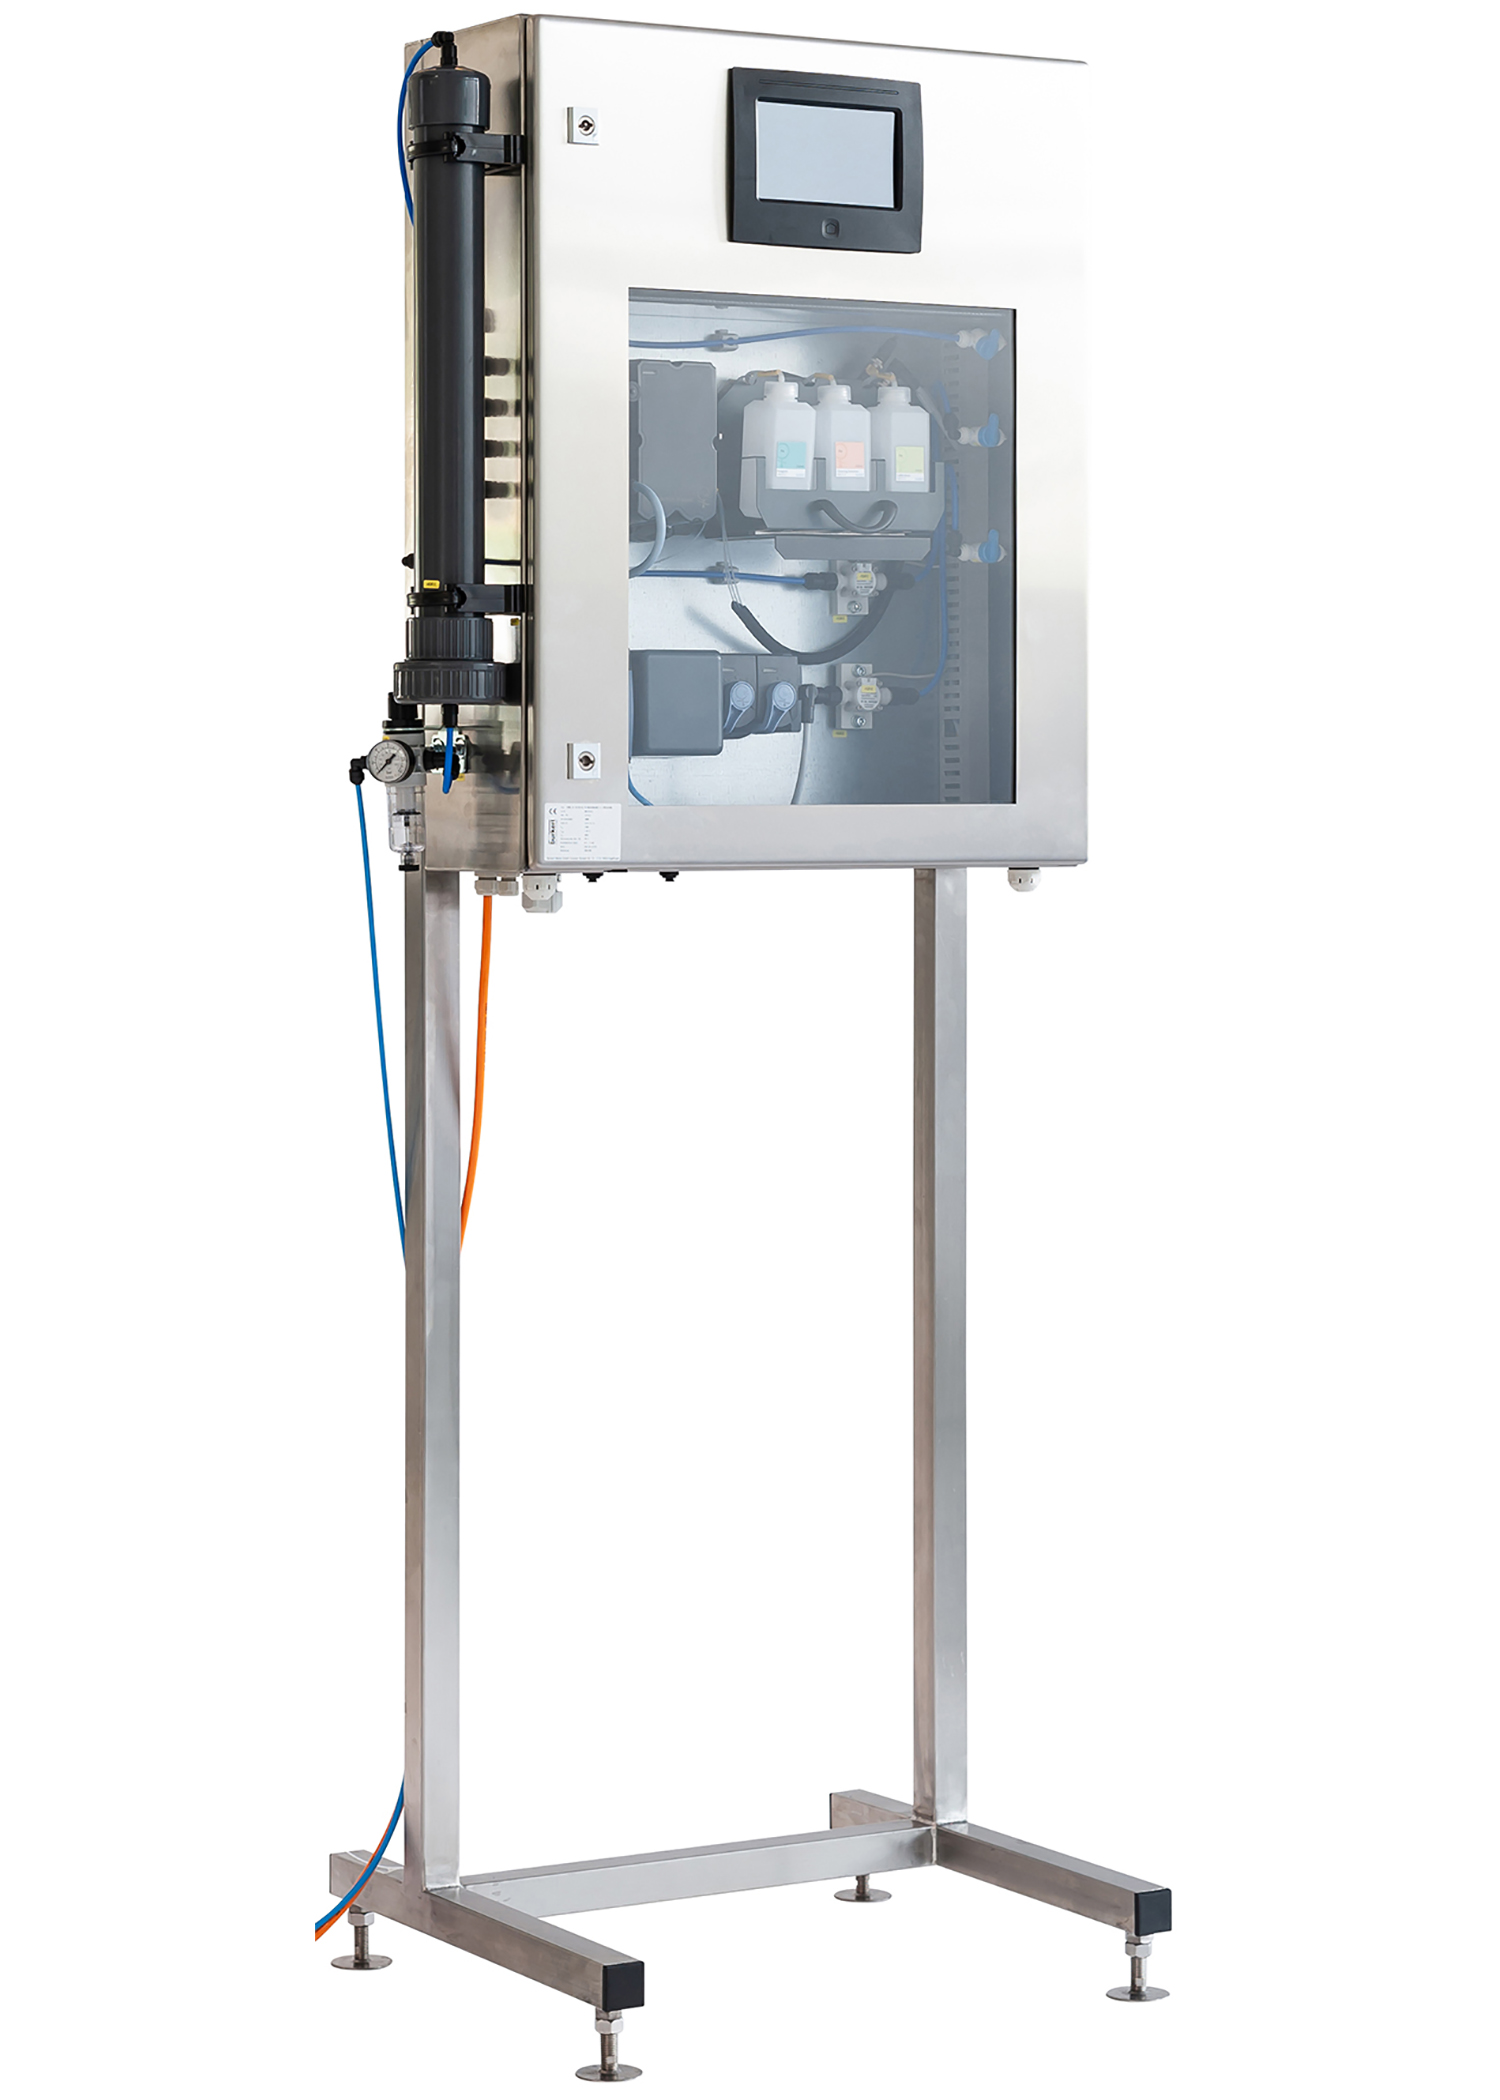 Bürkert’s 8905 water analysis system and chlorine sensor has a t90 time, the duration that it takes the sensor to measure 90% of the chlorine concentration, of less than 30 seconds.